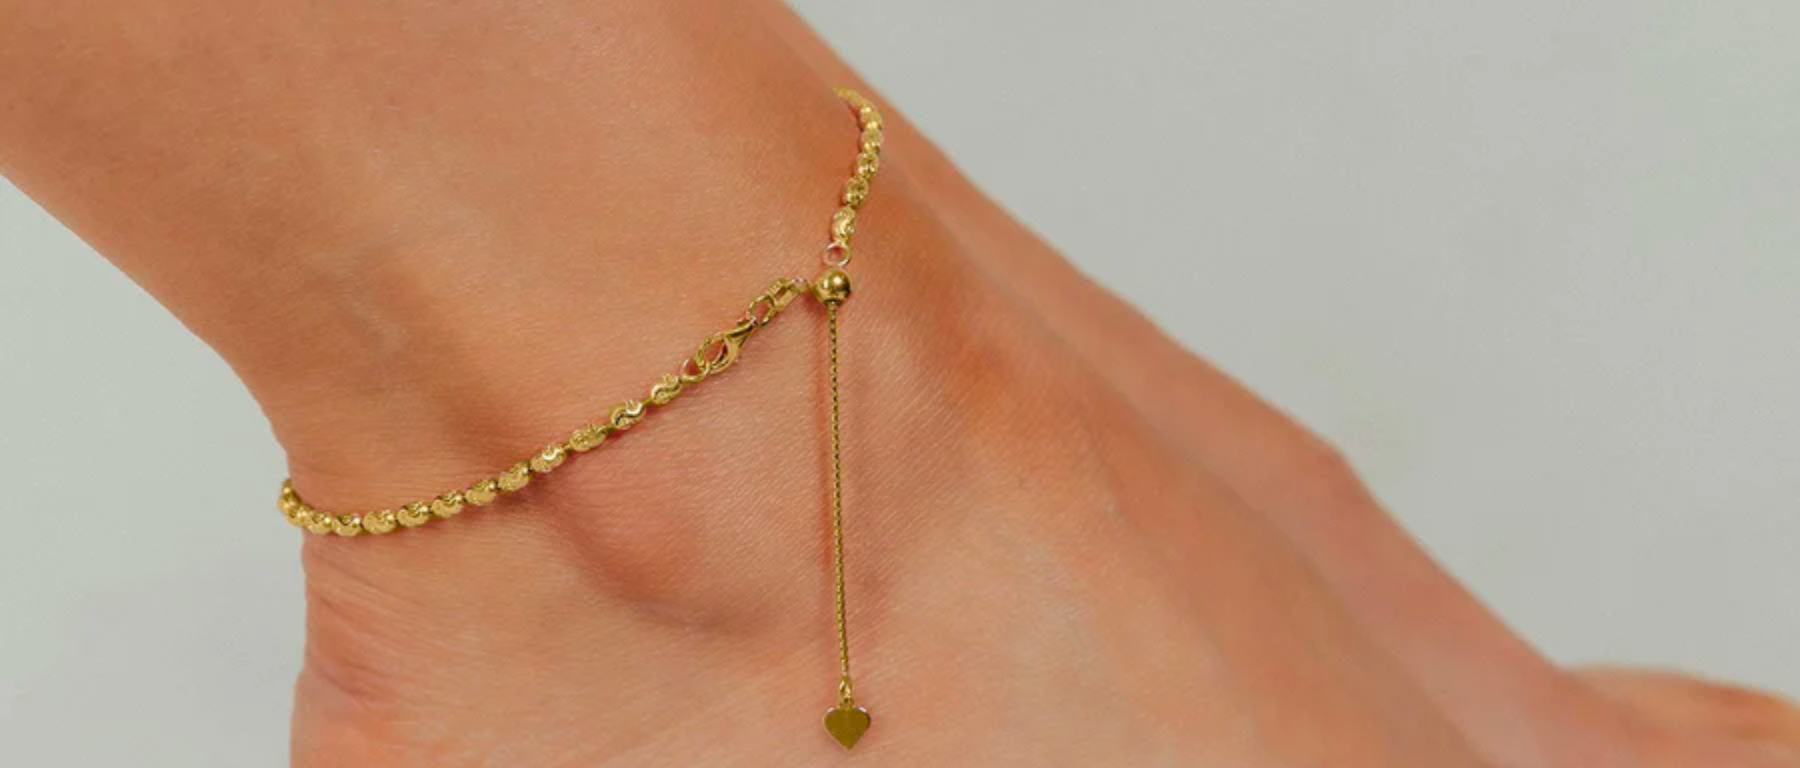 ADJUSTABLE MOON CUT BEAD ANKLET (GOLD)